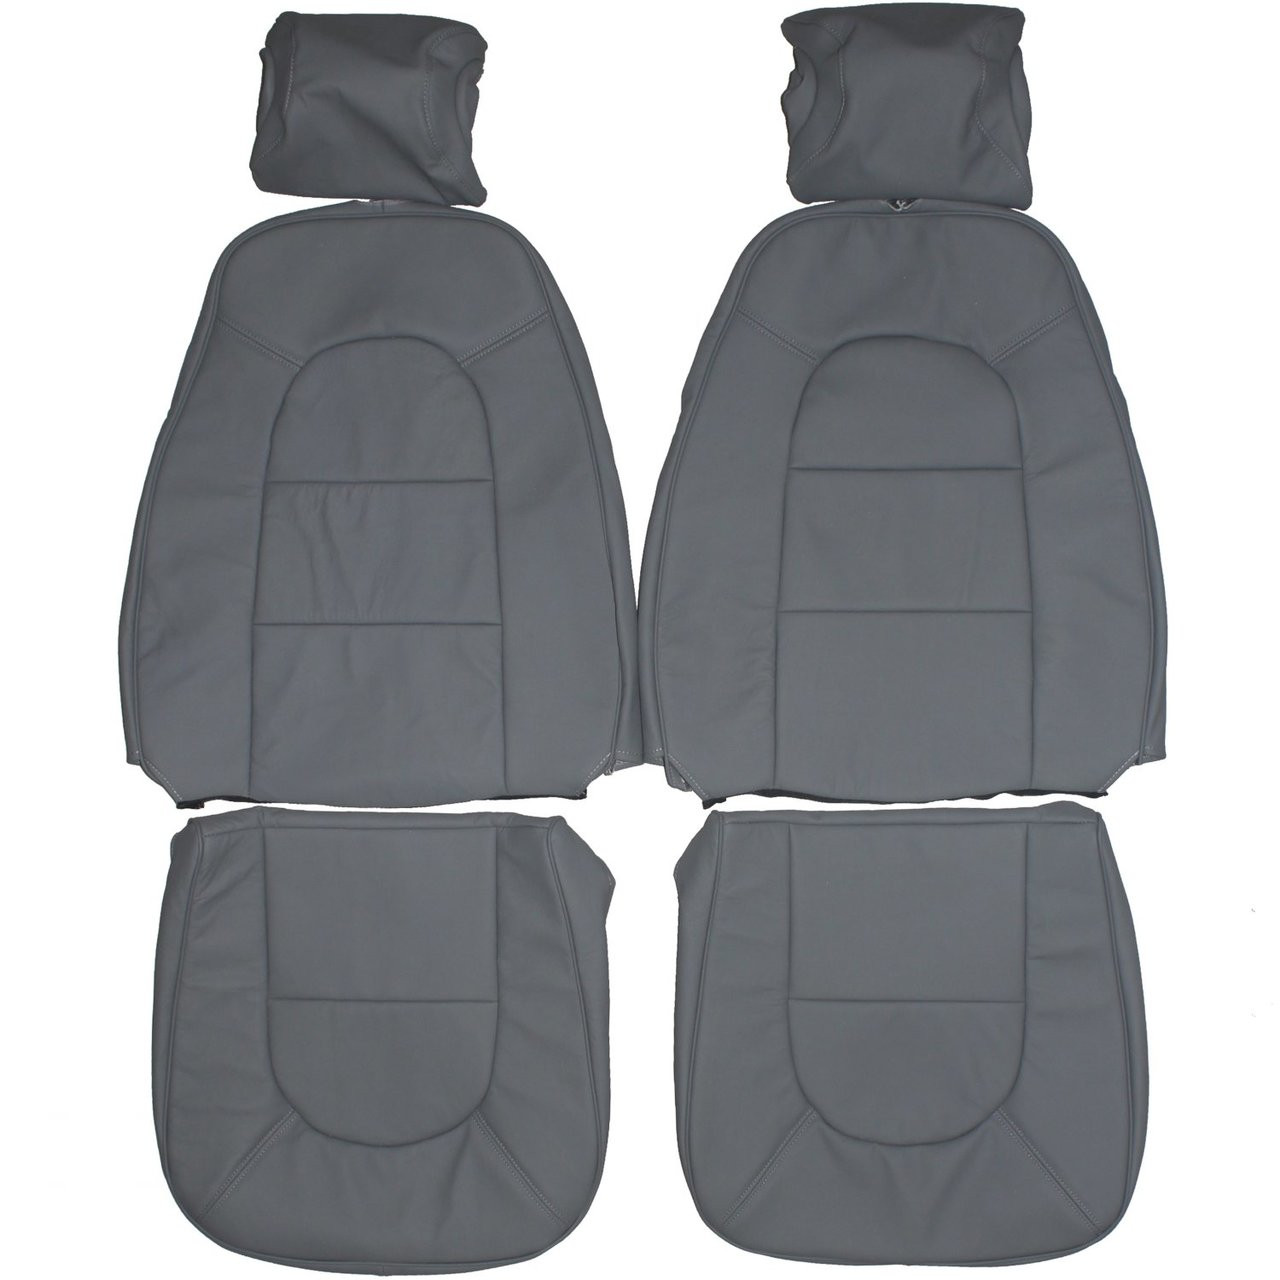 1986-1989 Saab 900 Hatchback Custom Real Leather Seat Covers (Front) -  Lseat.com